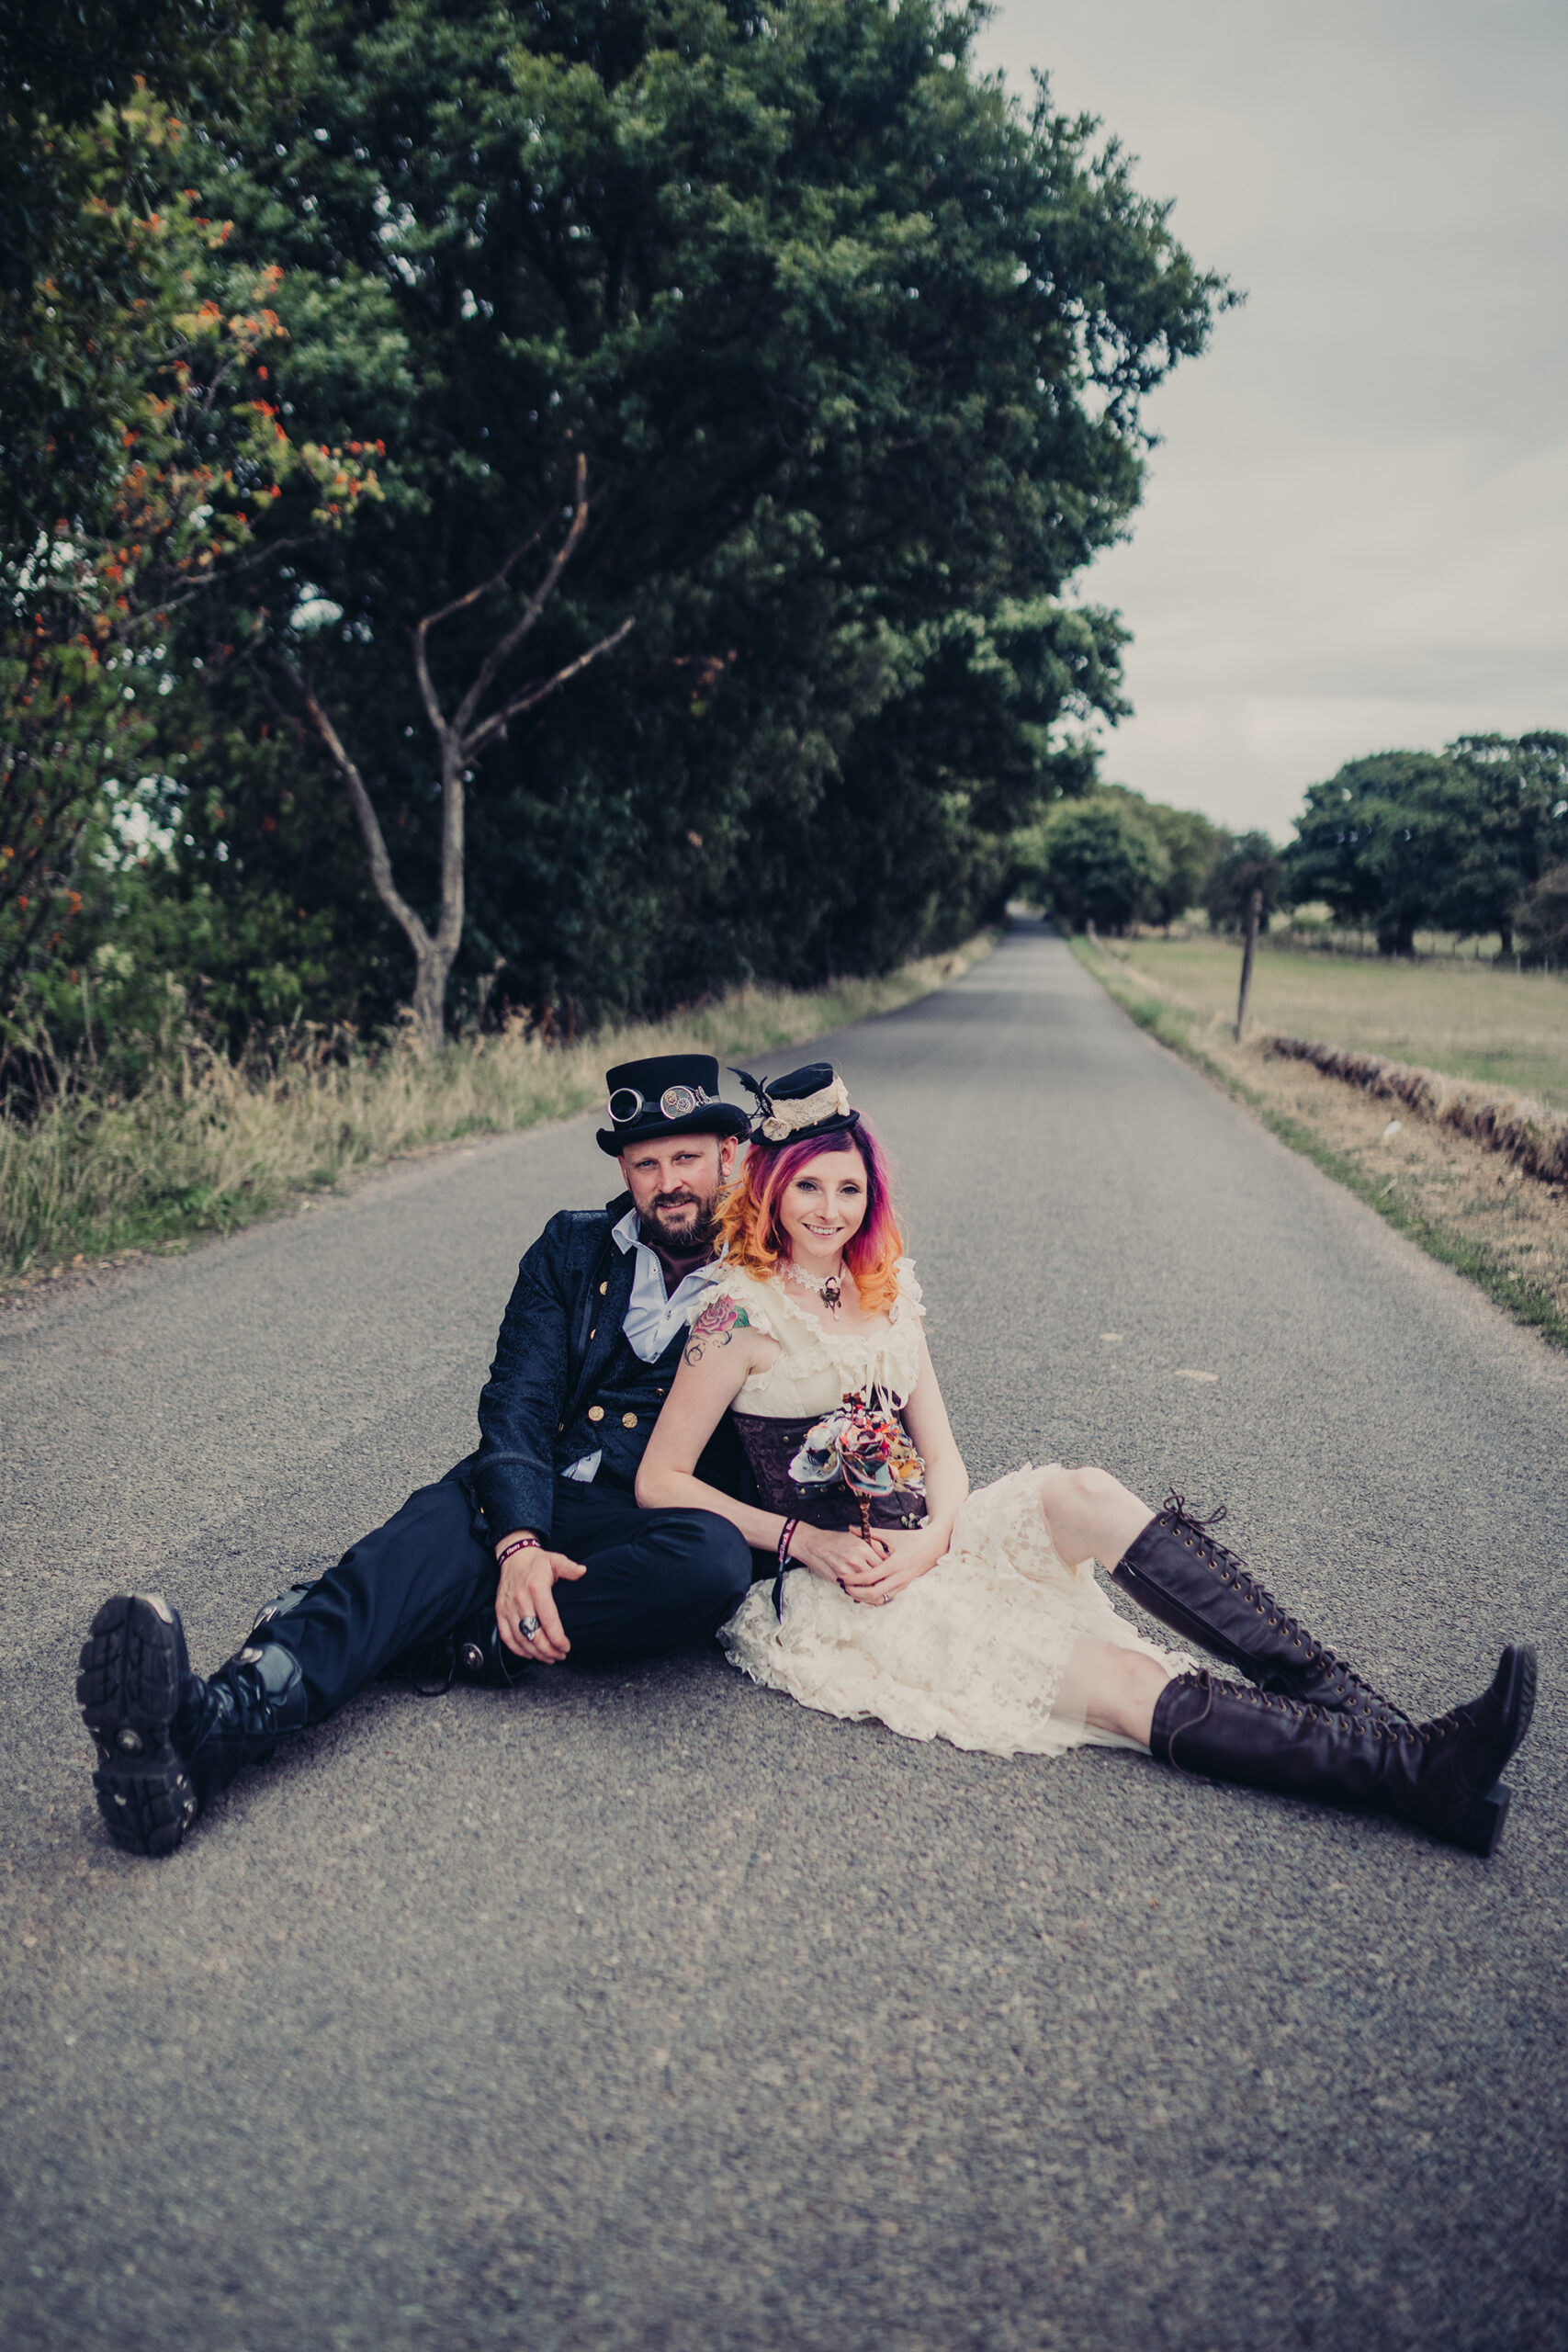 April Rien Steampunk Festival Wedding Chelsea Shoesmith Photography 042 scaled